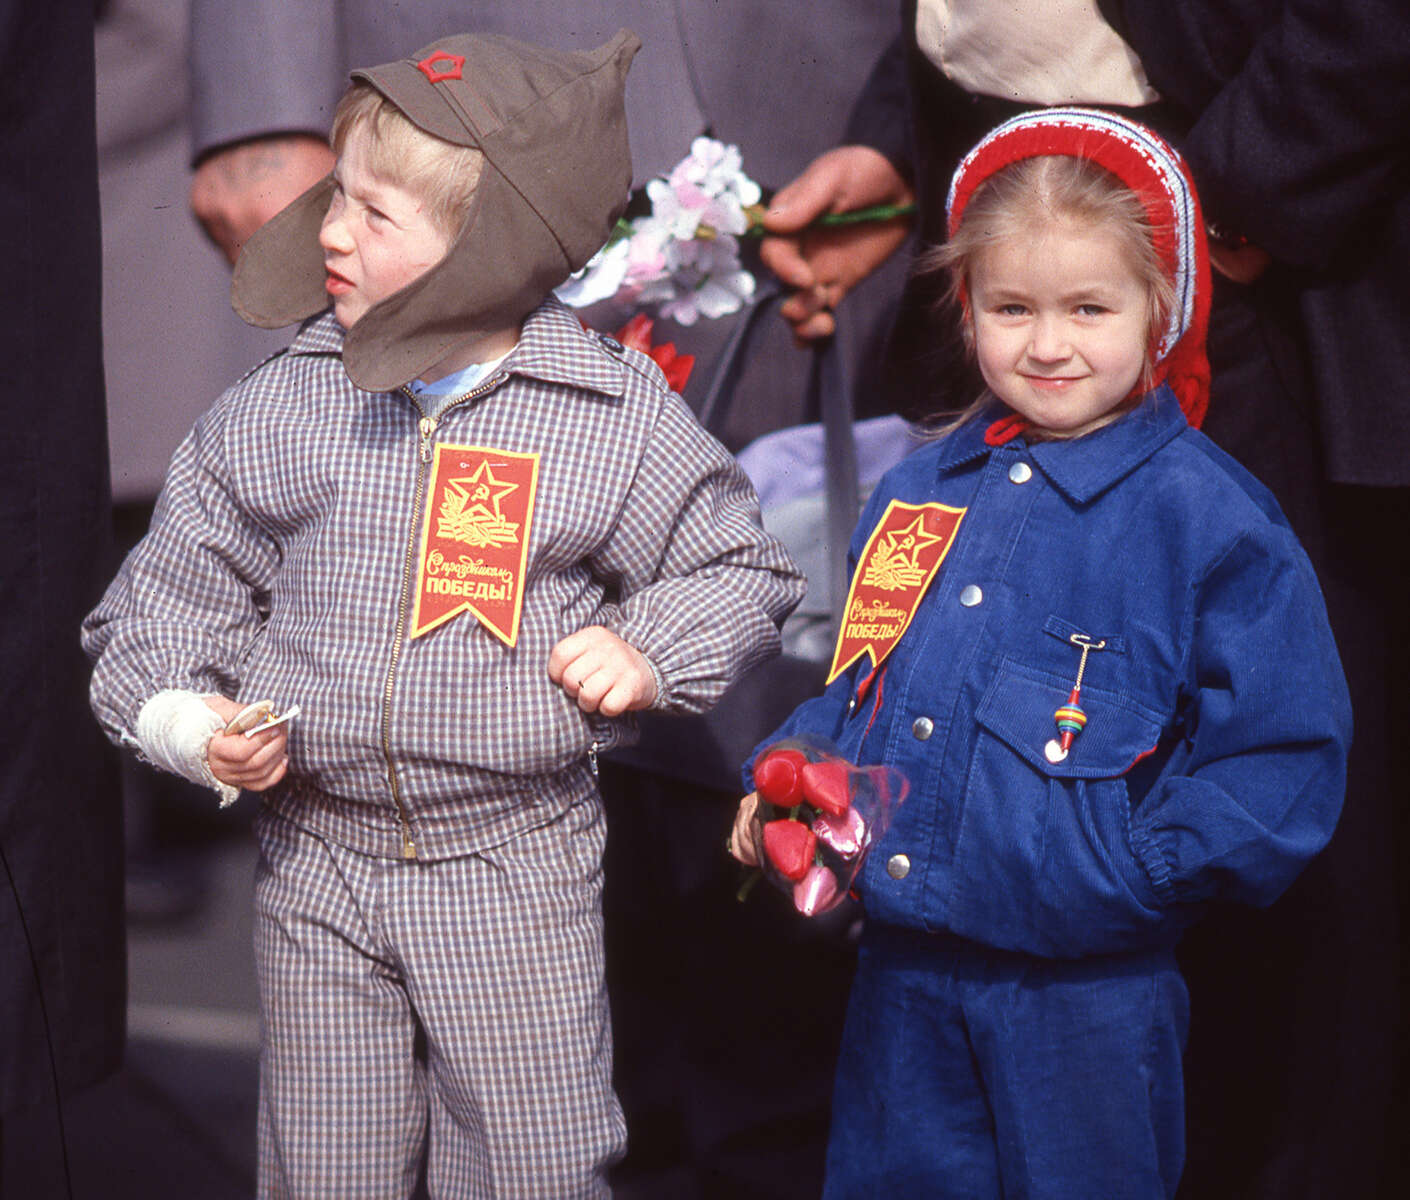 Youngsters along the parade route in Moscow. [Daily News and Wickedd Local Staff Photo/Art Illman]